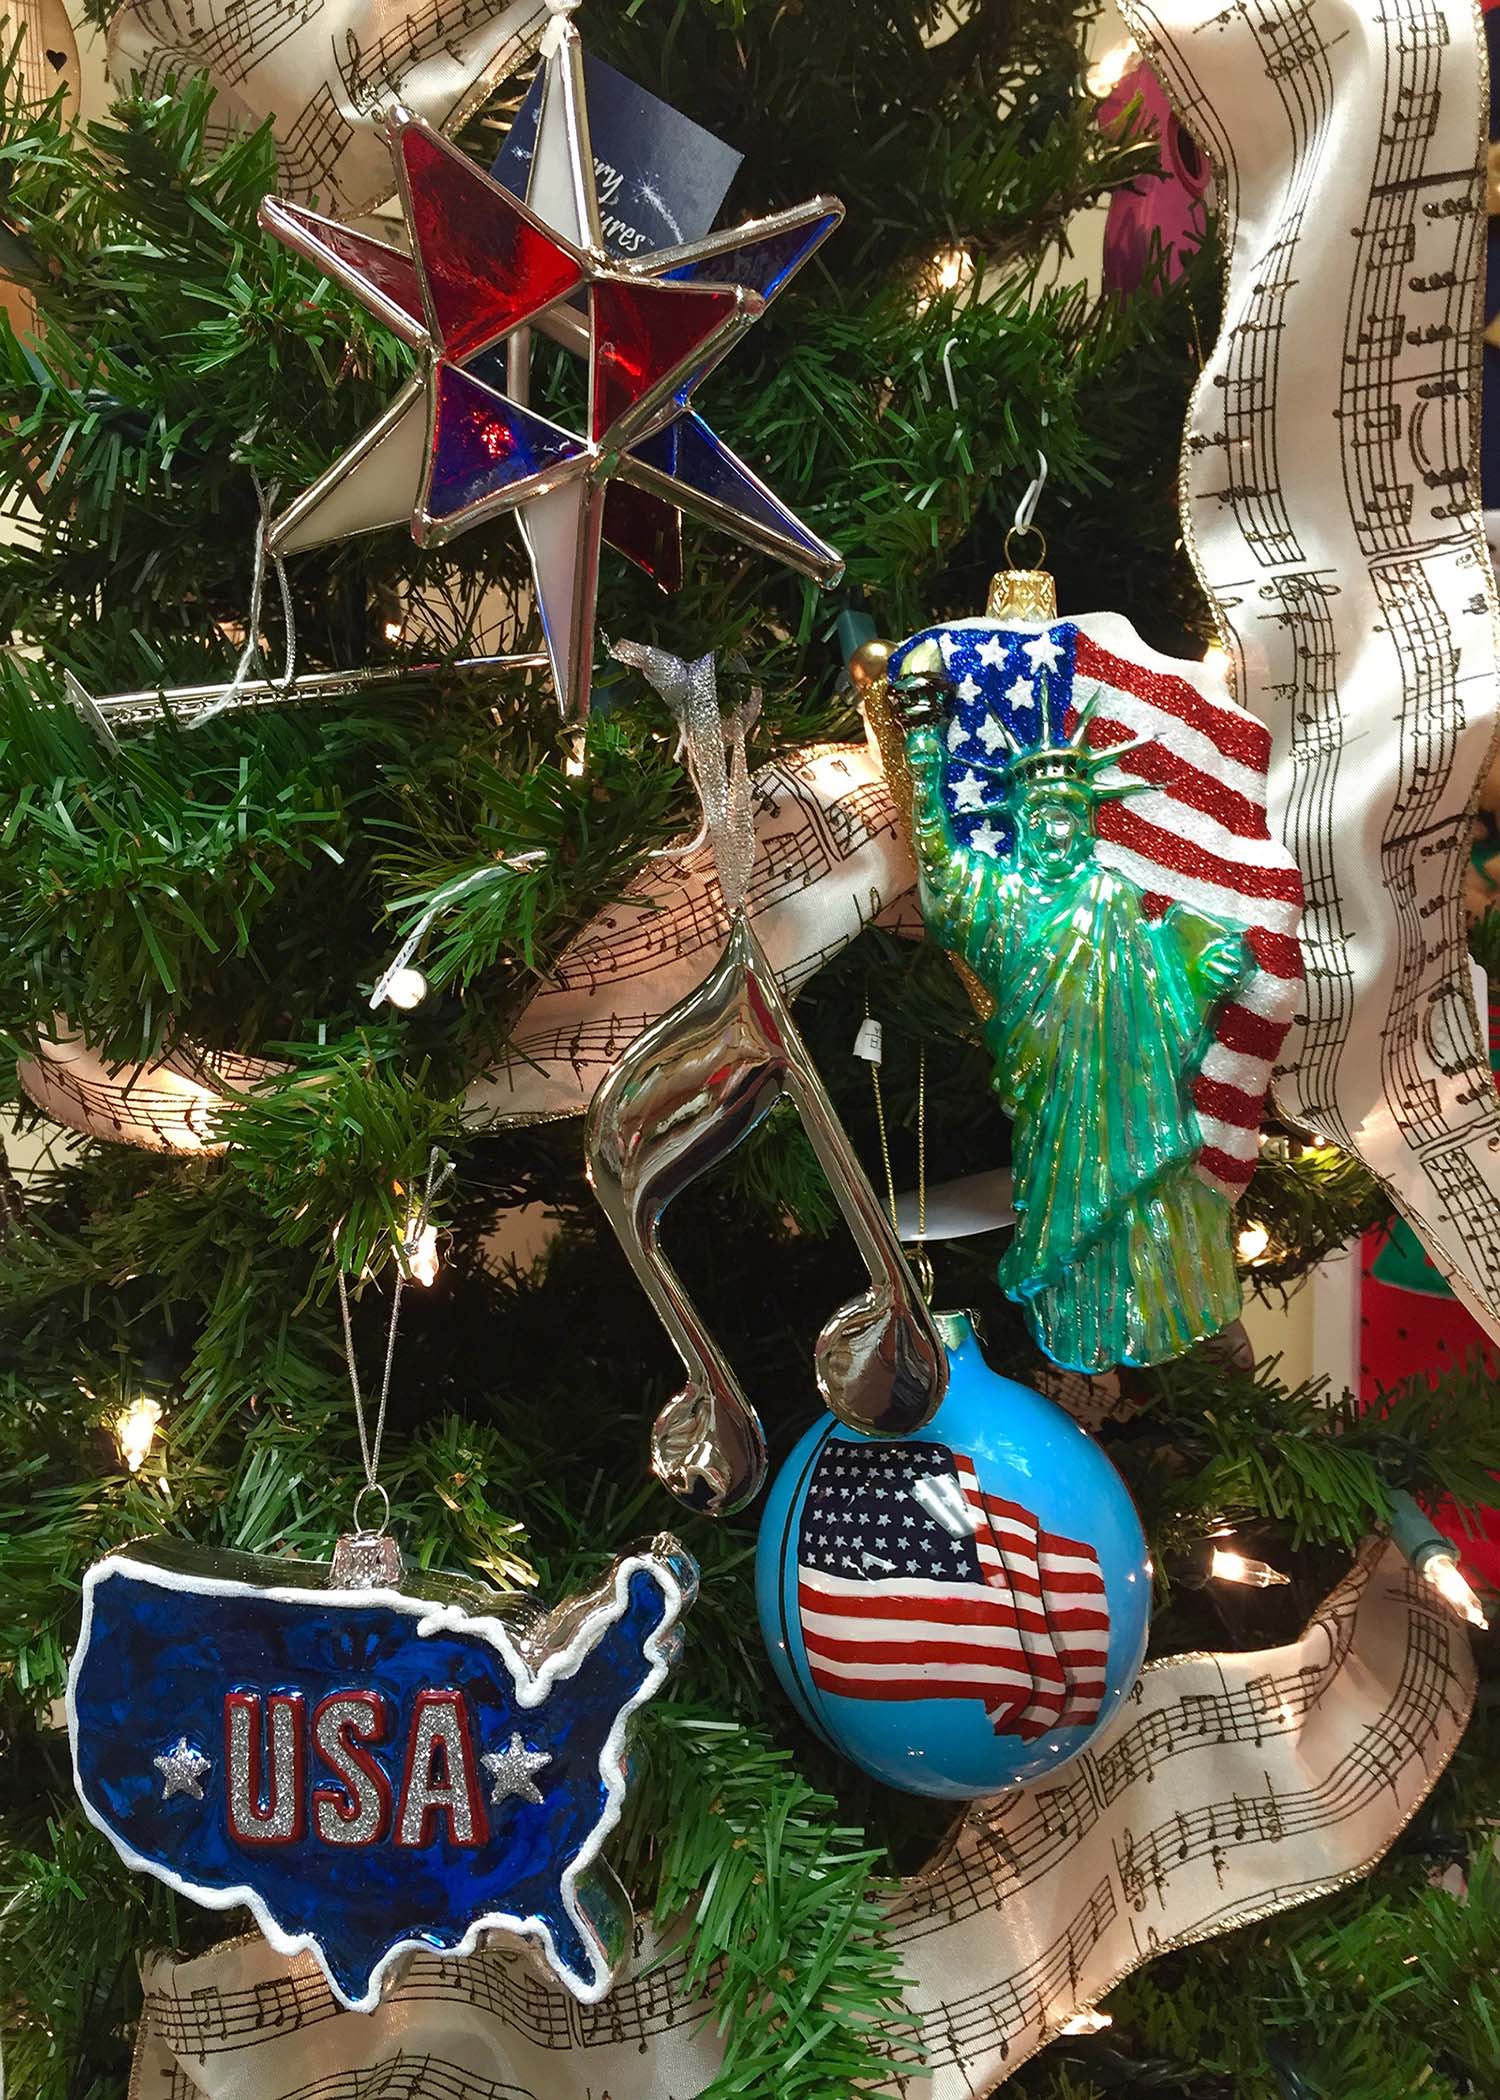 Patriotic ornaments with U.S.A. shape, U.S.A. flag, Statue of Liberty, and glass red, white, and blue star | OrnamentShop.com